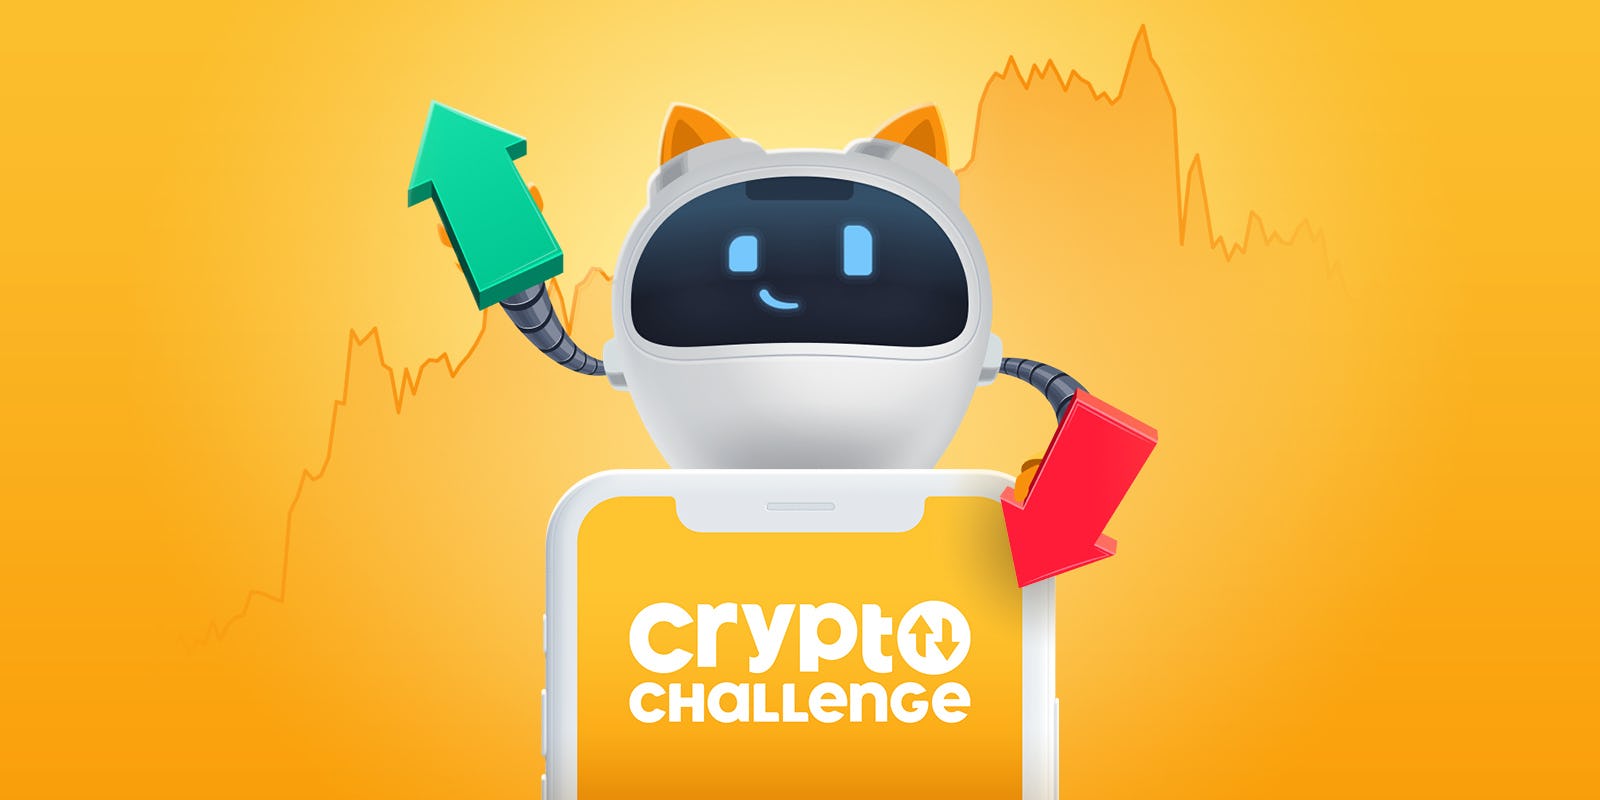 Crypto Challenge is here!